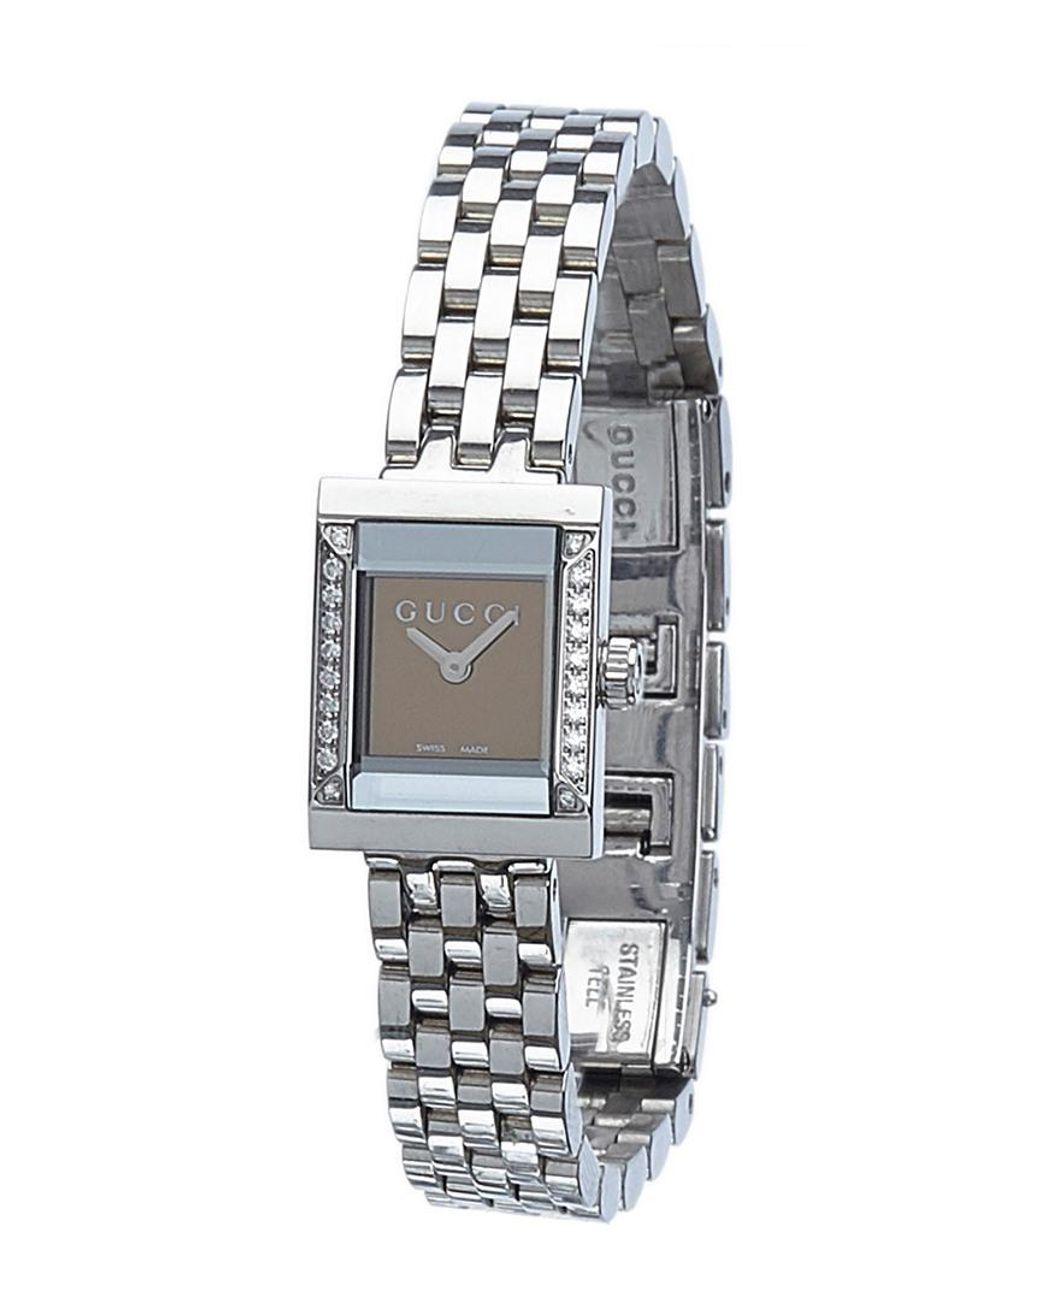 Gucci 128.5 Square Stainless Steel Watch in Metallic | Lyst UK